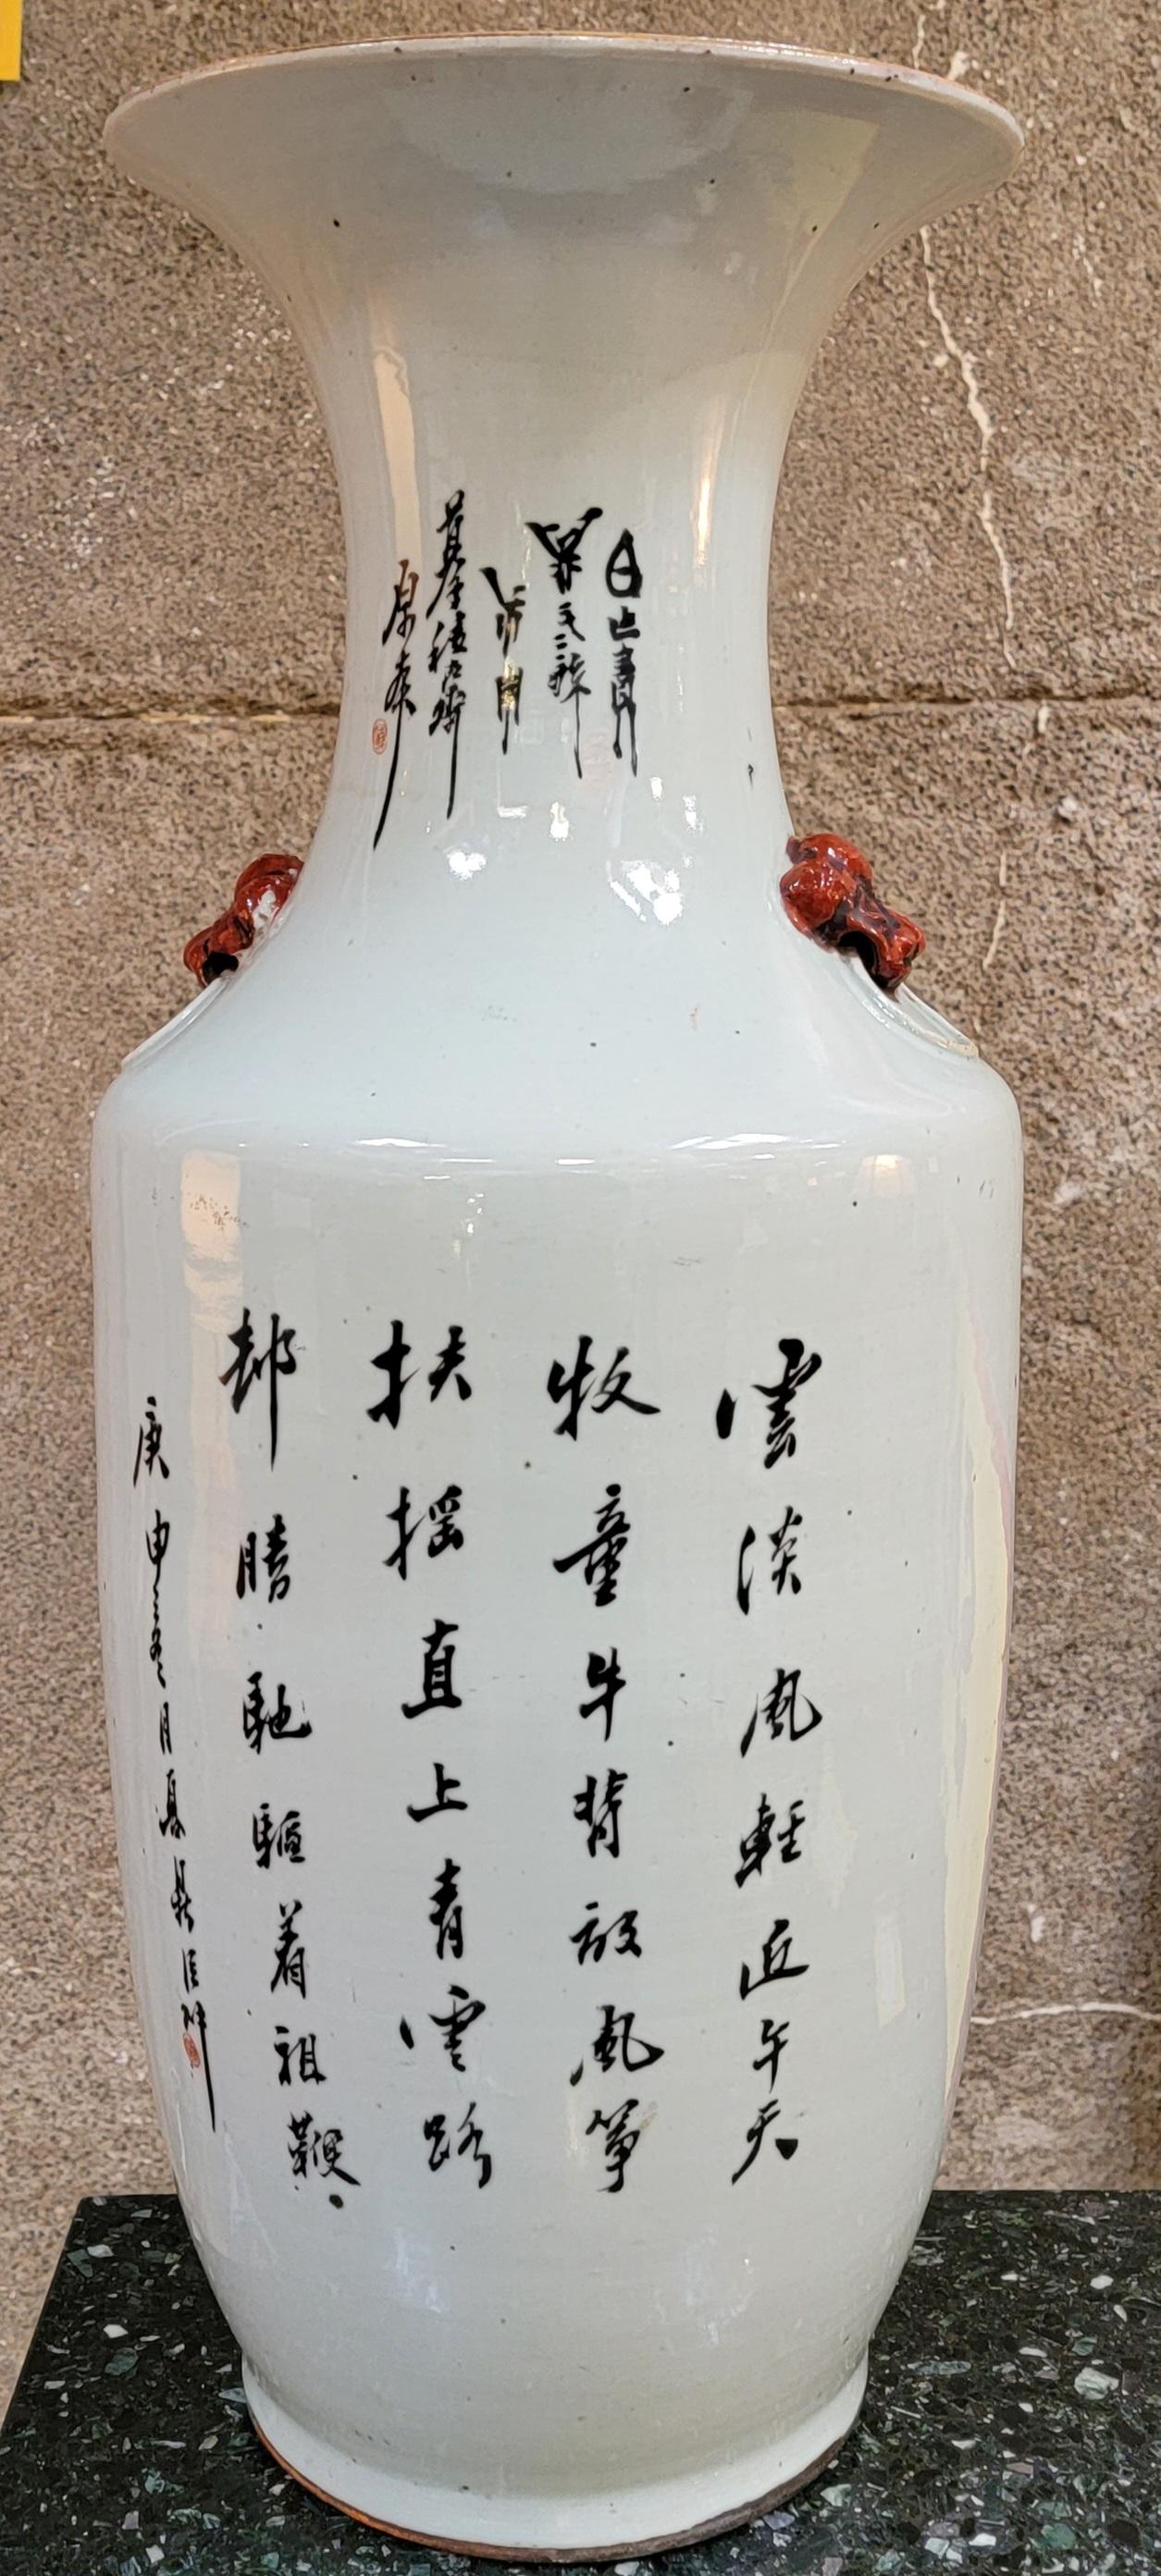 Large scale Chinese ceramic vase measuring 22.5 inches tall. Decorated with oxen and figure with Chinese lettering. Dragon handles.